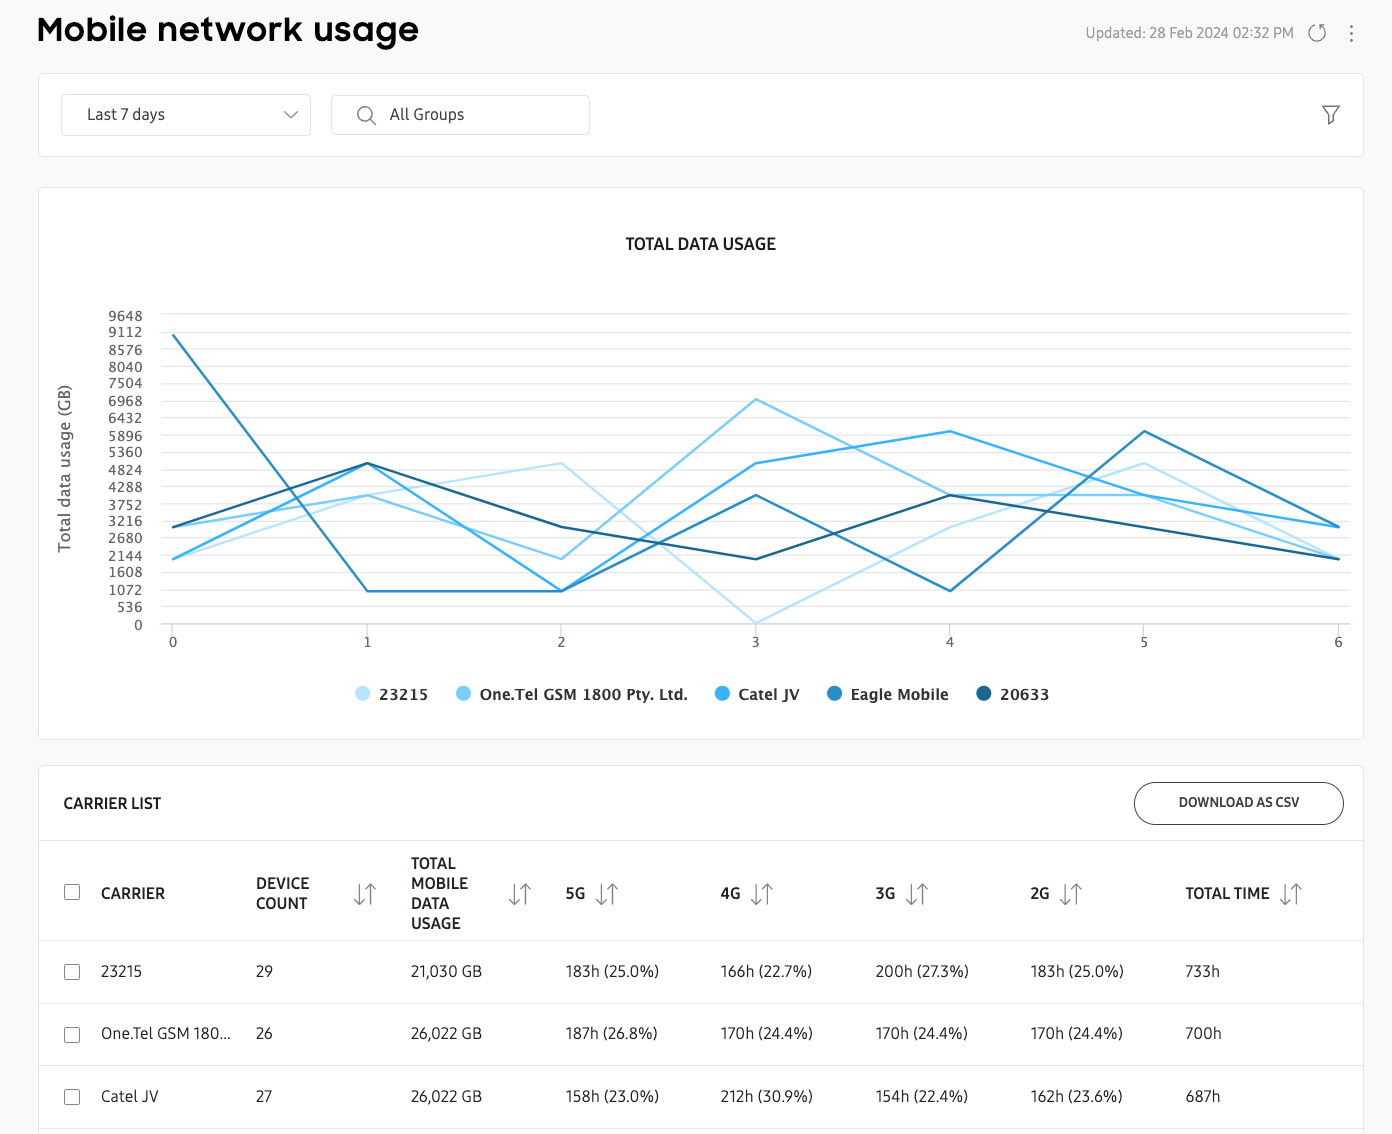 Mobile network usage expanded view